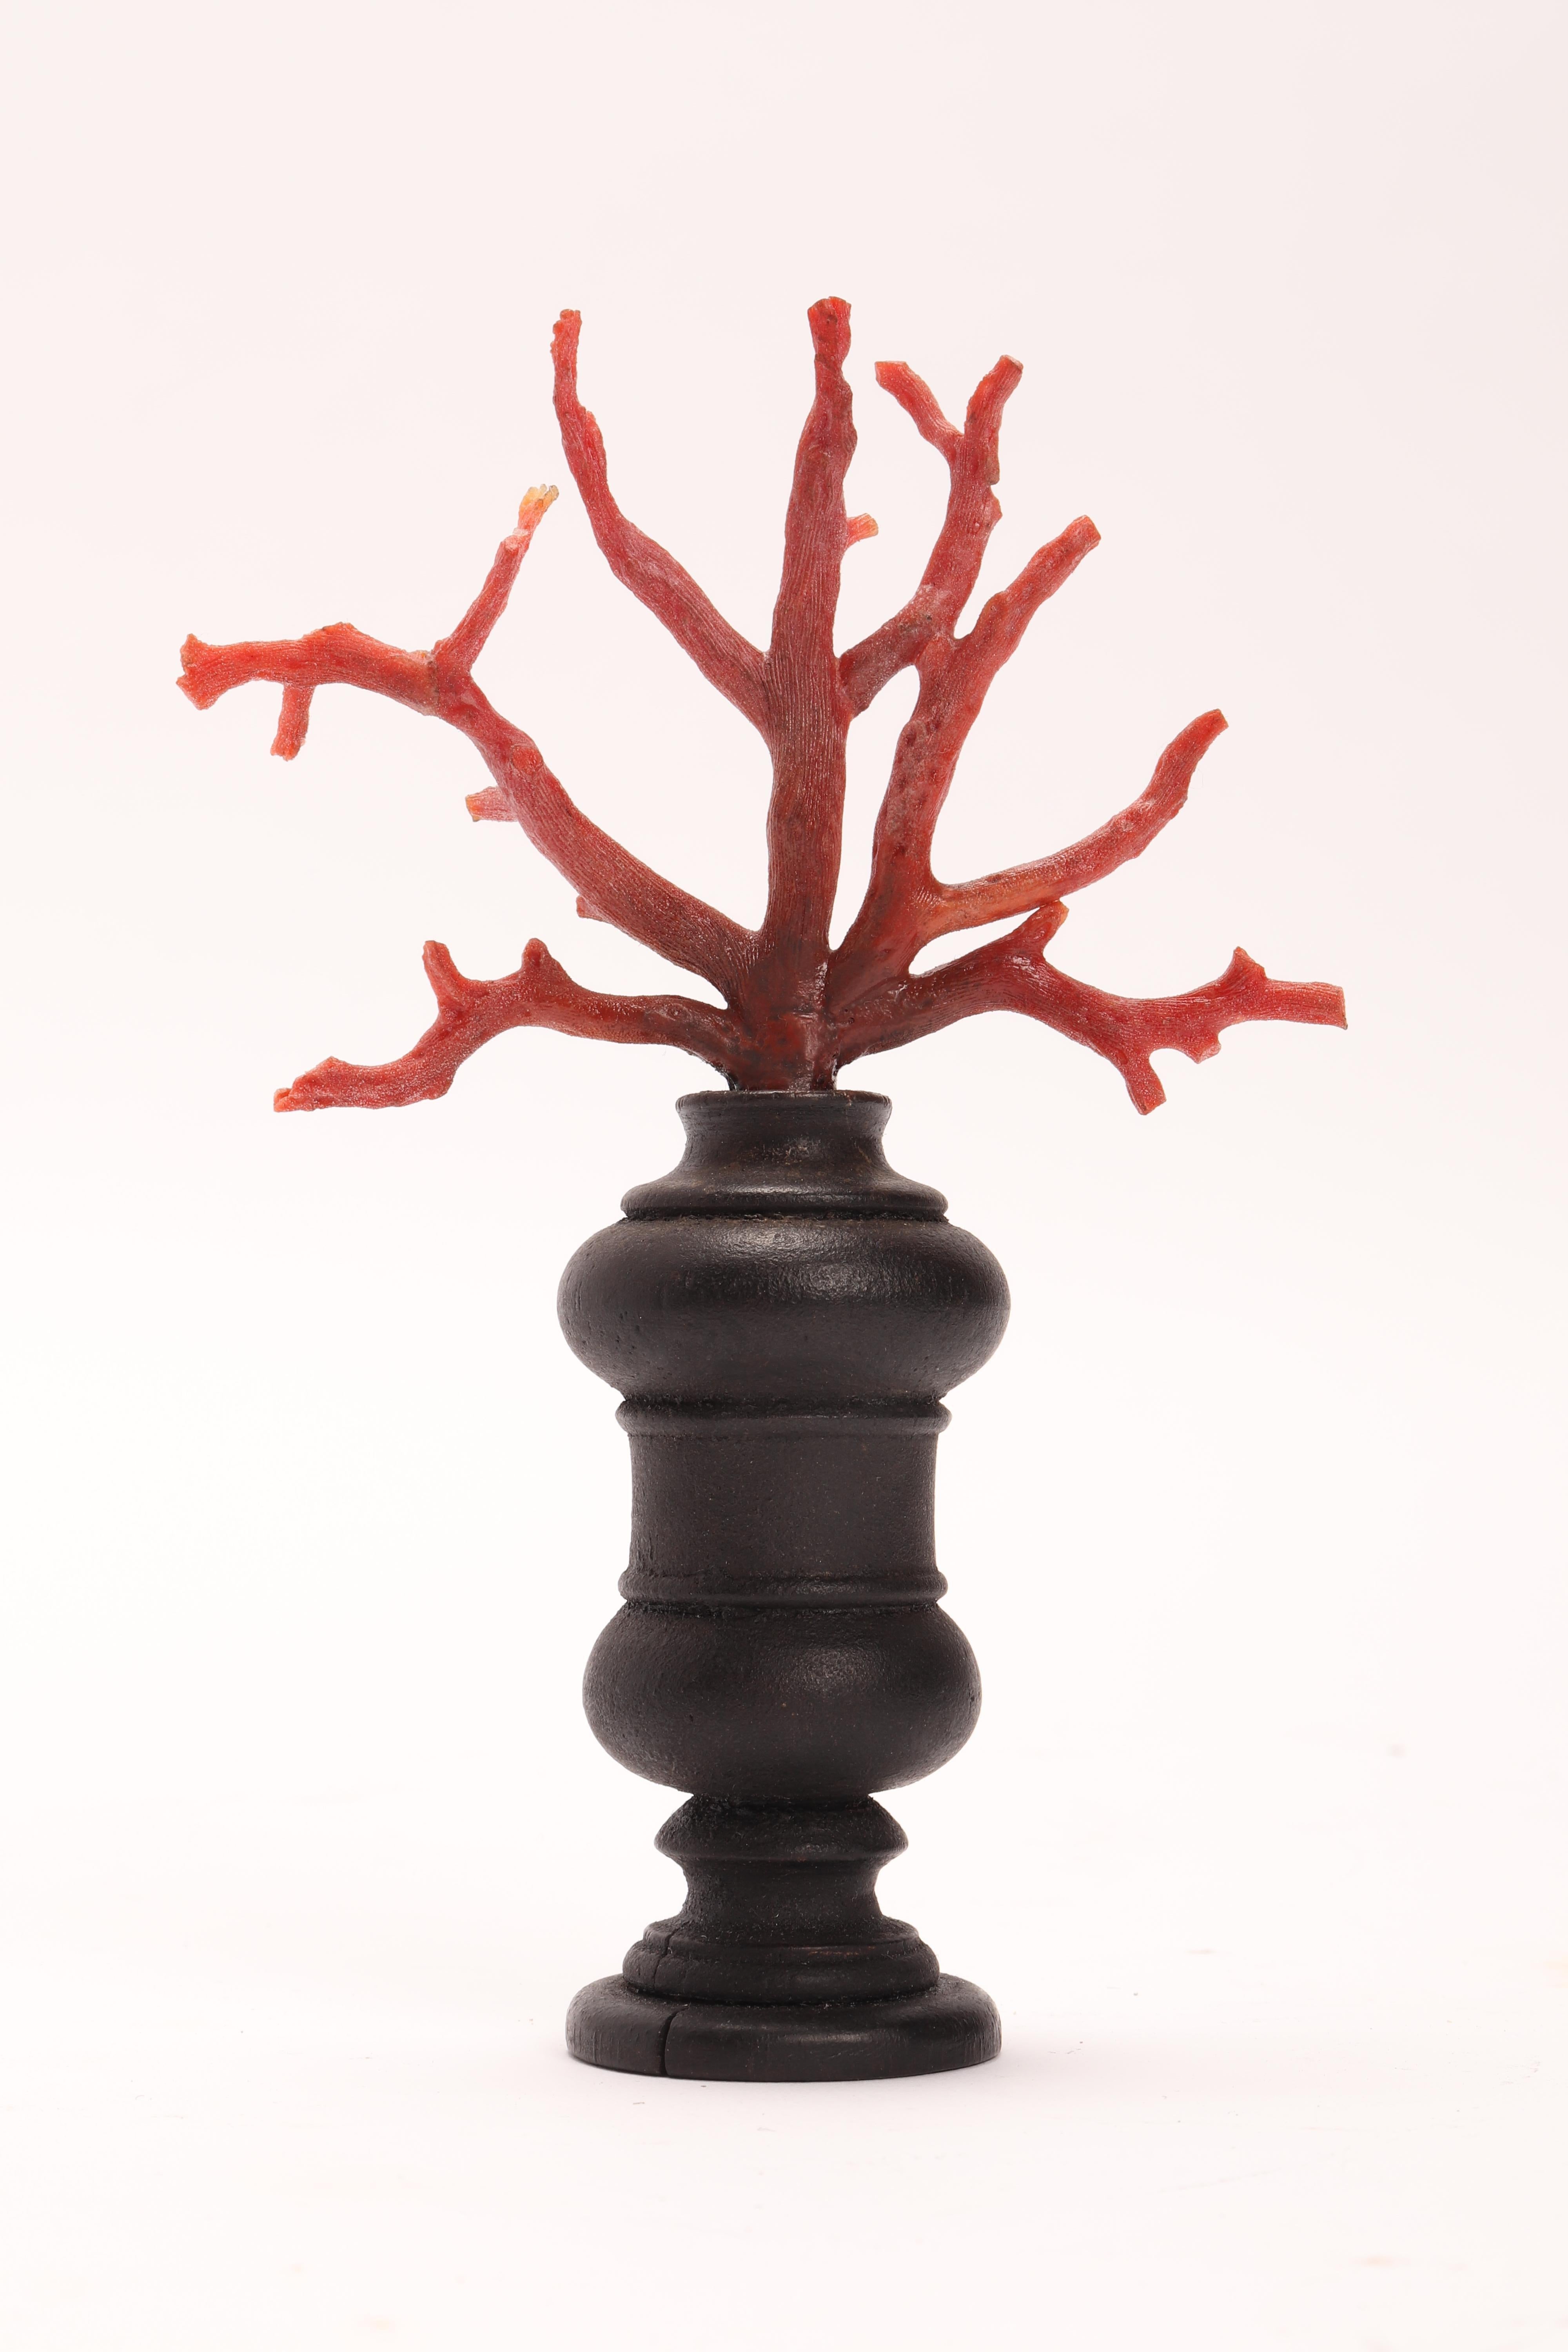 A Naturalia mineral specimen cut off a branch of Mediterranean coral mounted on a wooden base. It shows a wooden base with a moved profile, finished with black ebonized varnish.

 